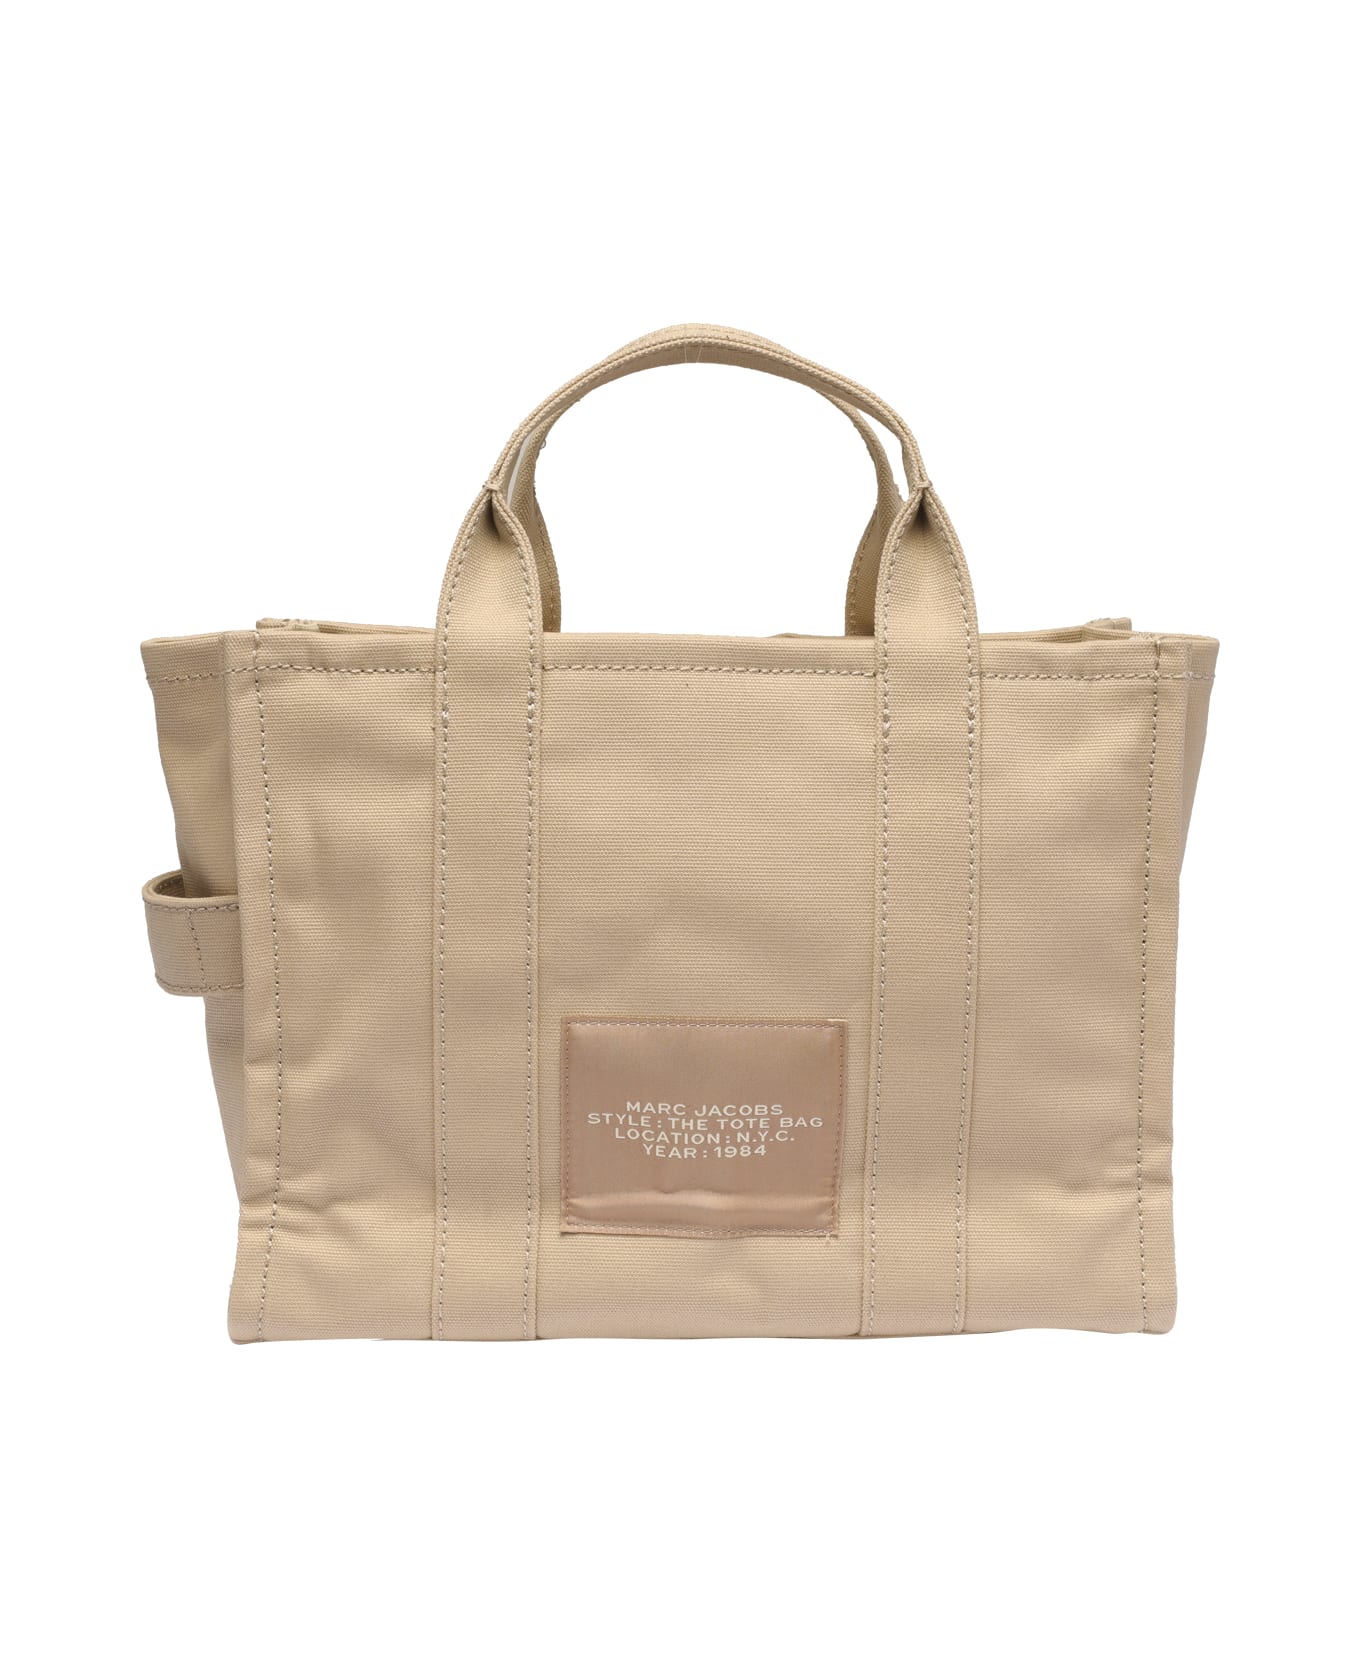 Marc Jacobs The Medium Tote Bag - Beige トートバッグ